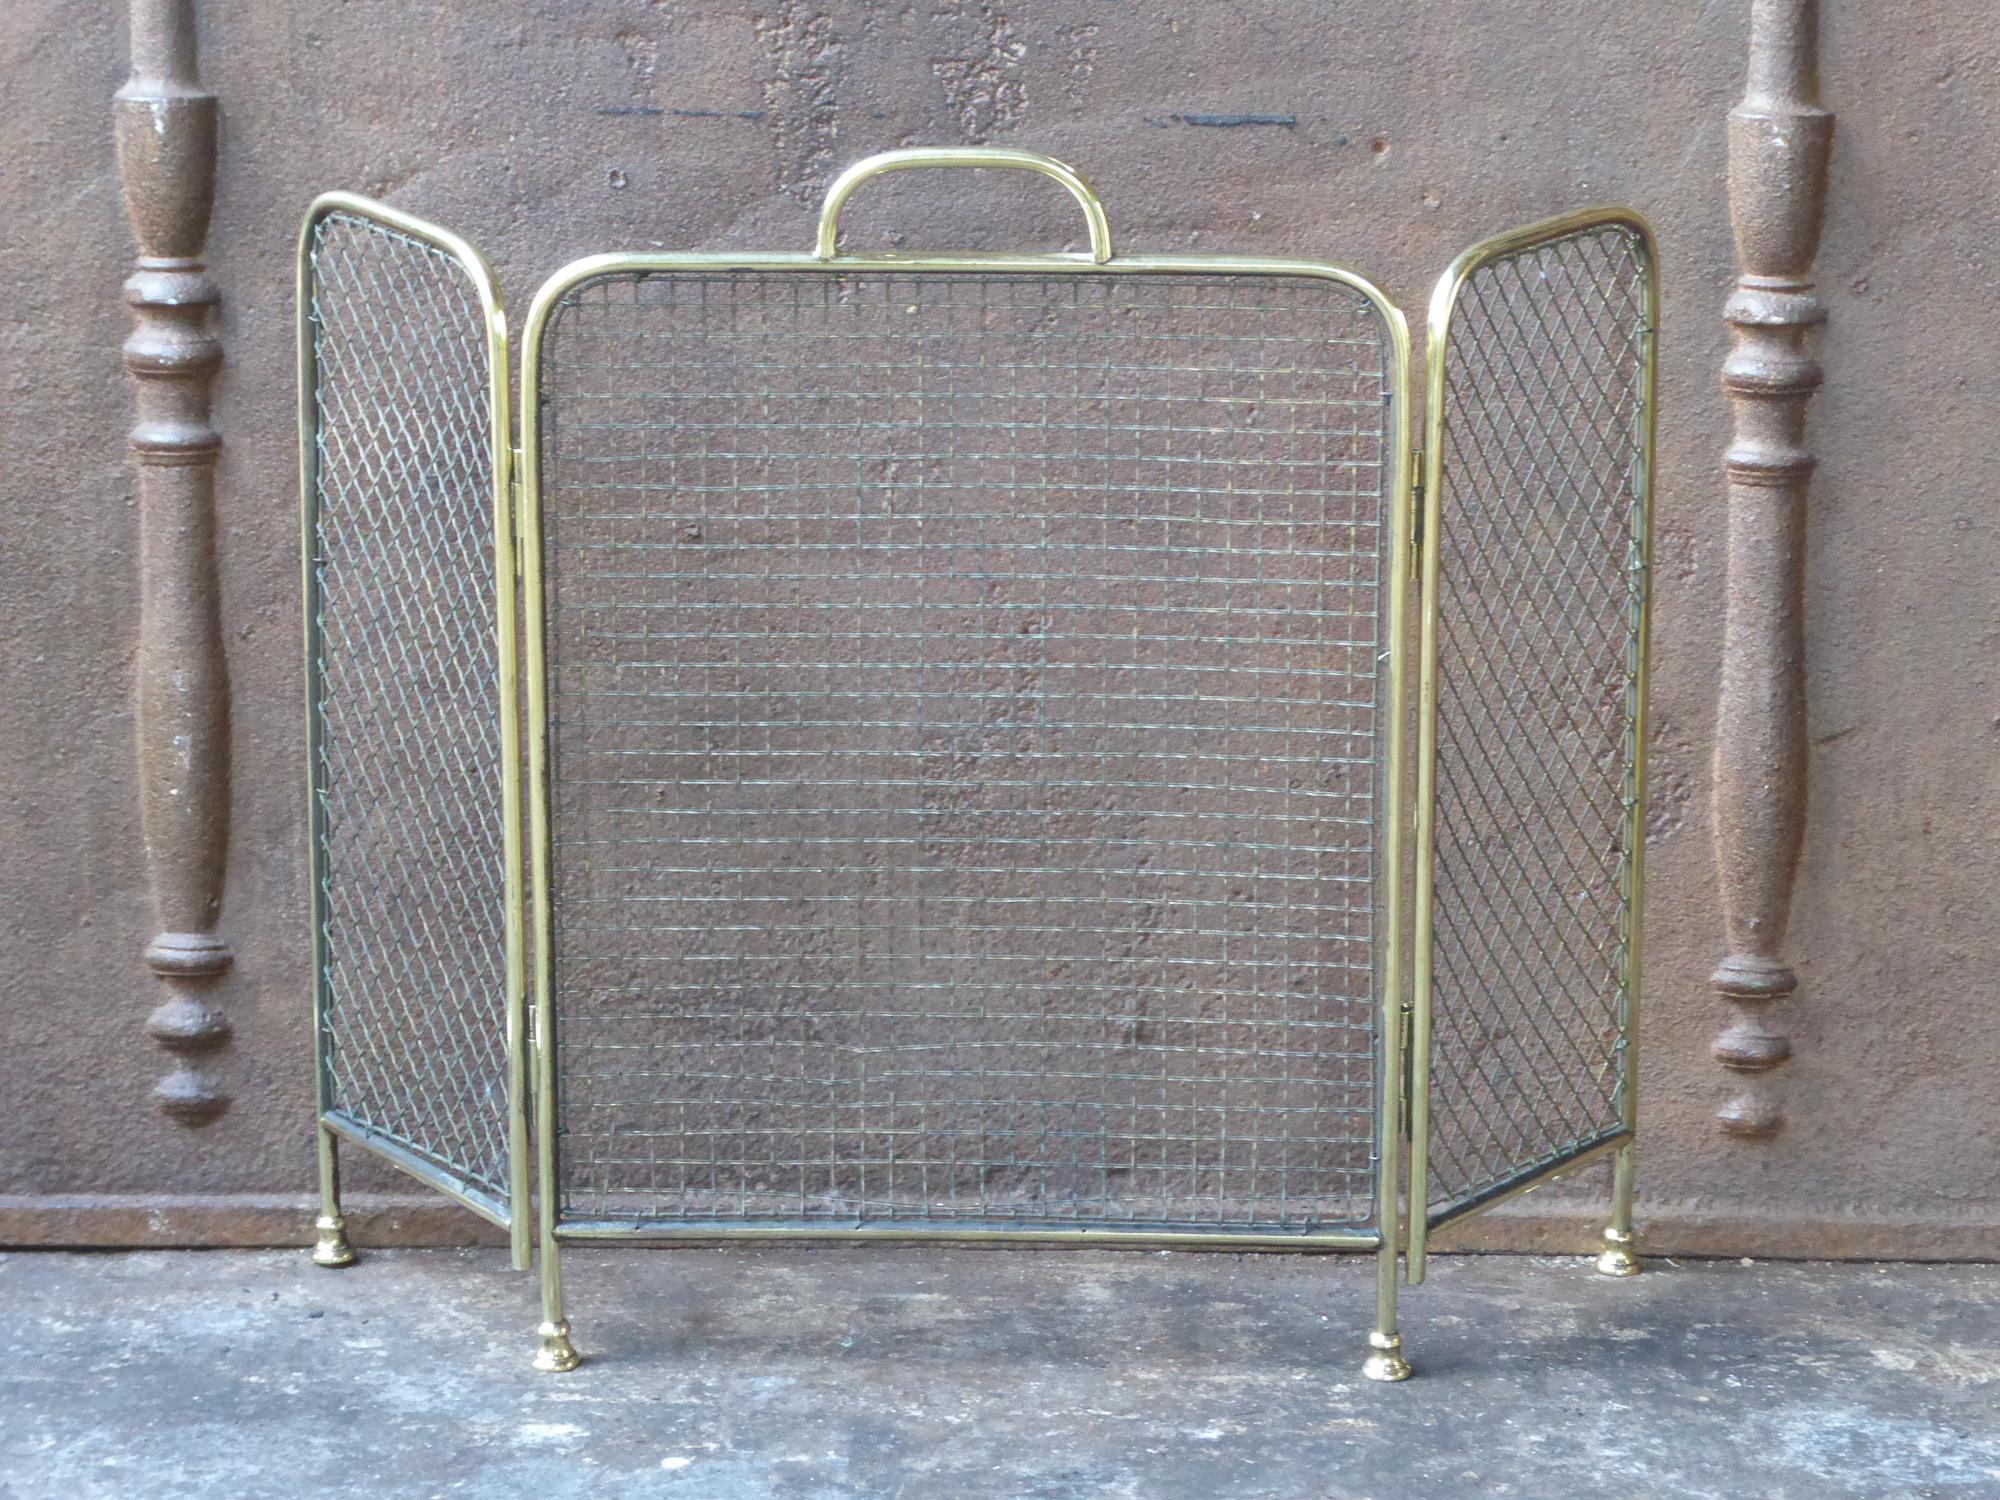 19th century English Victorian fireplace screen made of polished brass and iron mesh.

We have a unique and specialized collection of antique and used fireplace accessories consisting of more than 1000 listings at 1stdibs. Amongst others, we